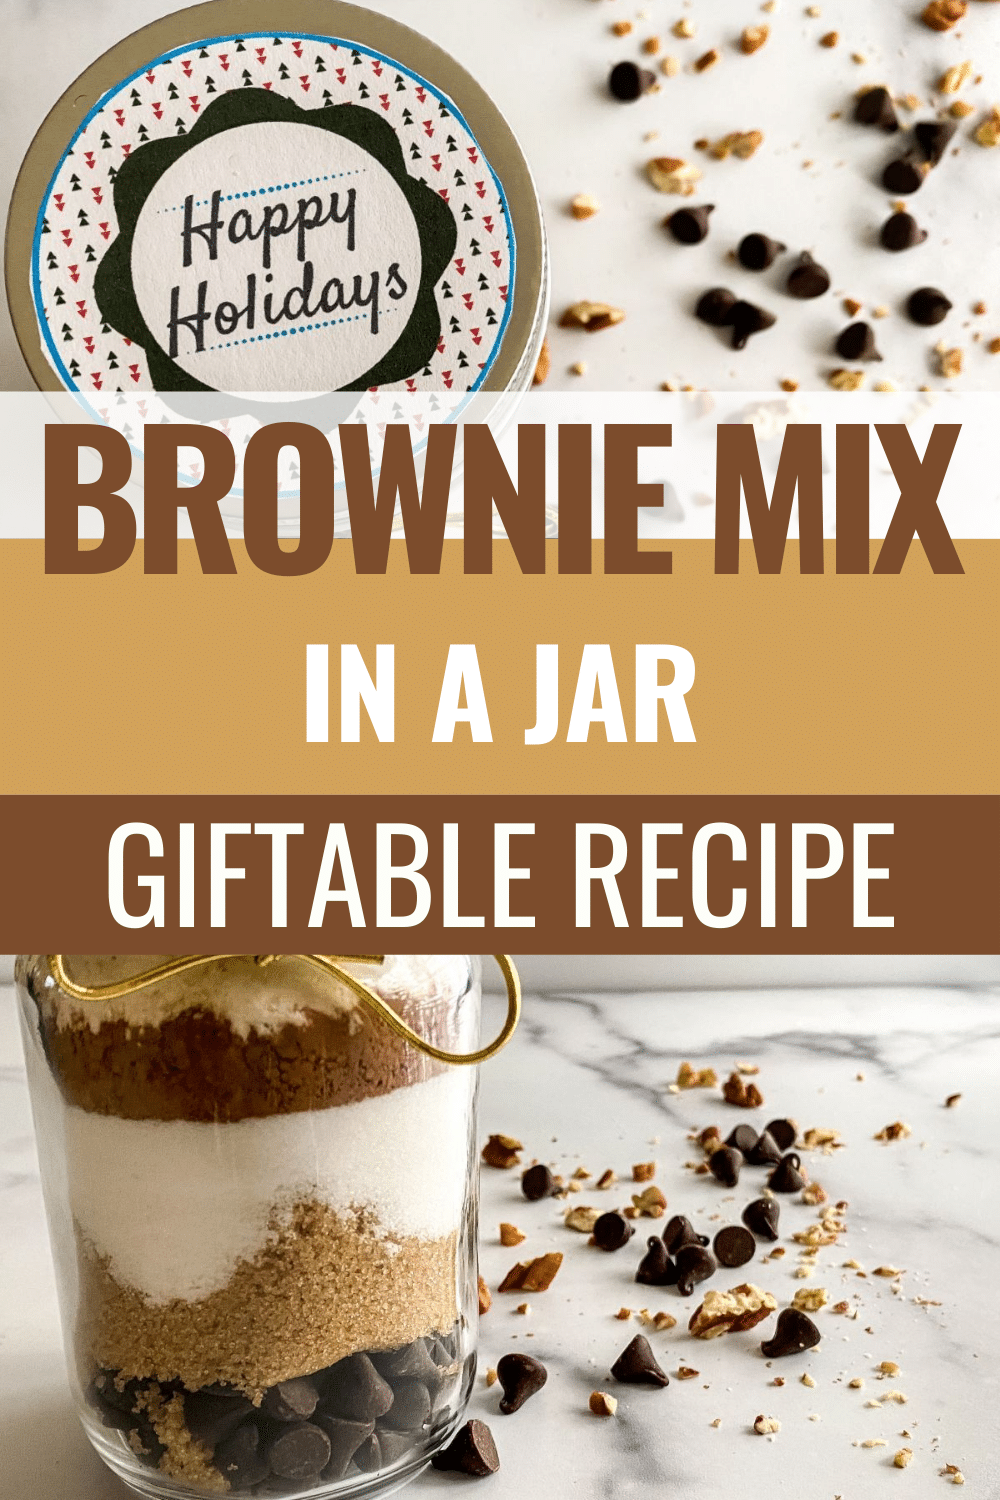 Brownie Mix in a Jar makes for a perfect teacher or neighbor gift. It's easy to make and is a budget-friendly way to give a tasty gift. #teachergift #giftidea #browniemixinajar #christmas #browniemix via @wondermomwannab